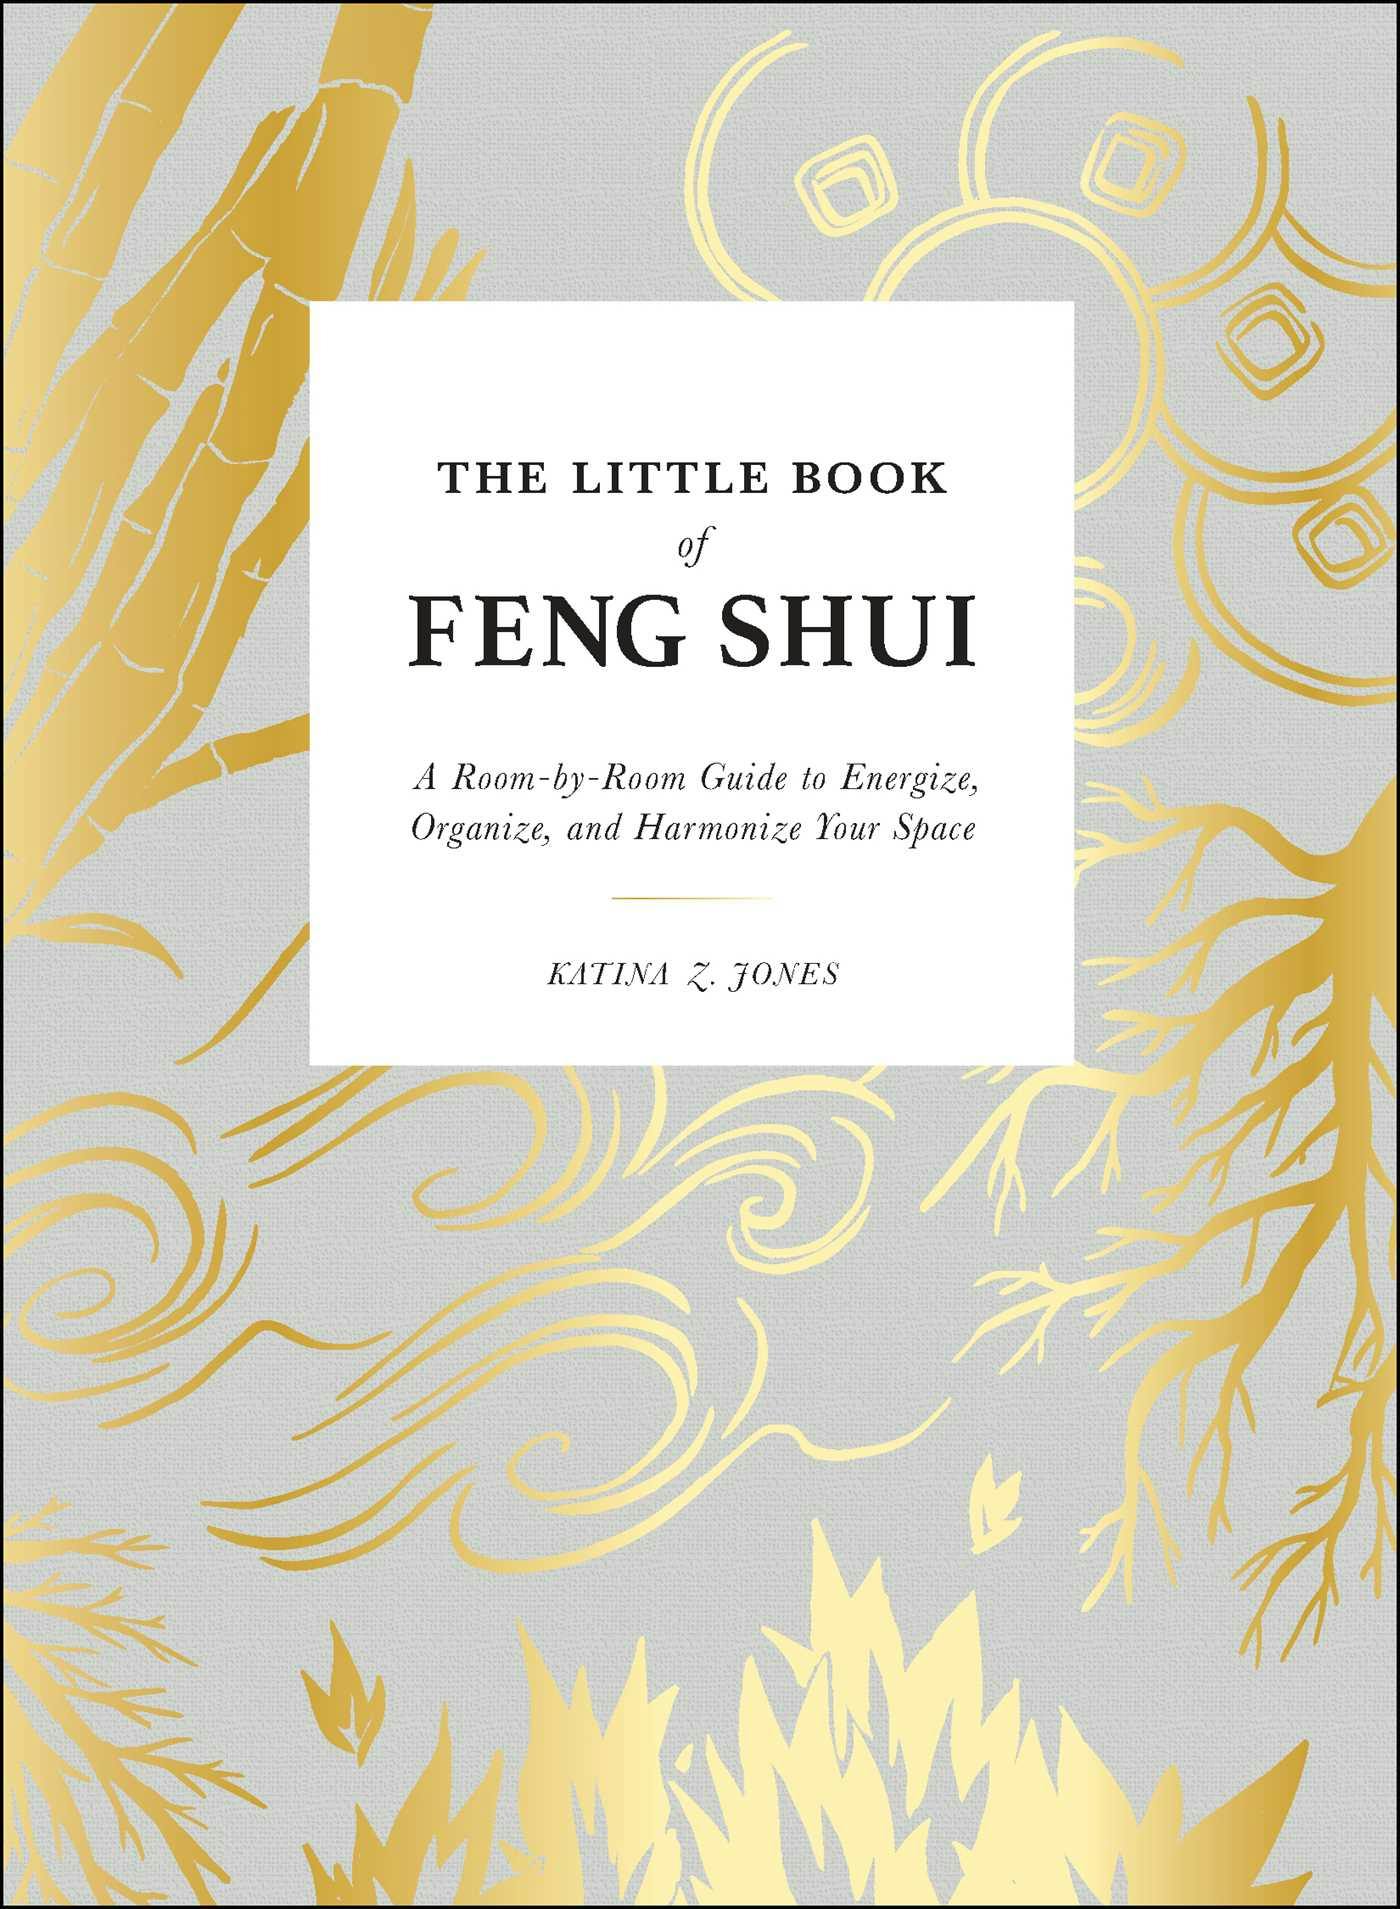 The Little Book of Feng Shui: A Room-by-Room Guide to Energize, Organize, and Harmonize Your Space - undefined